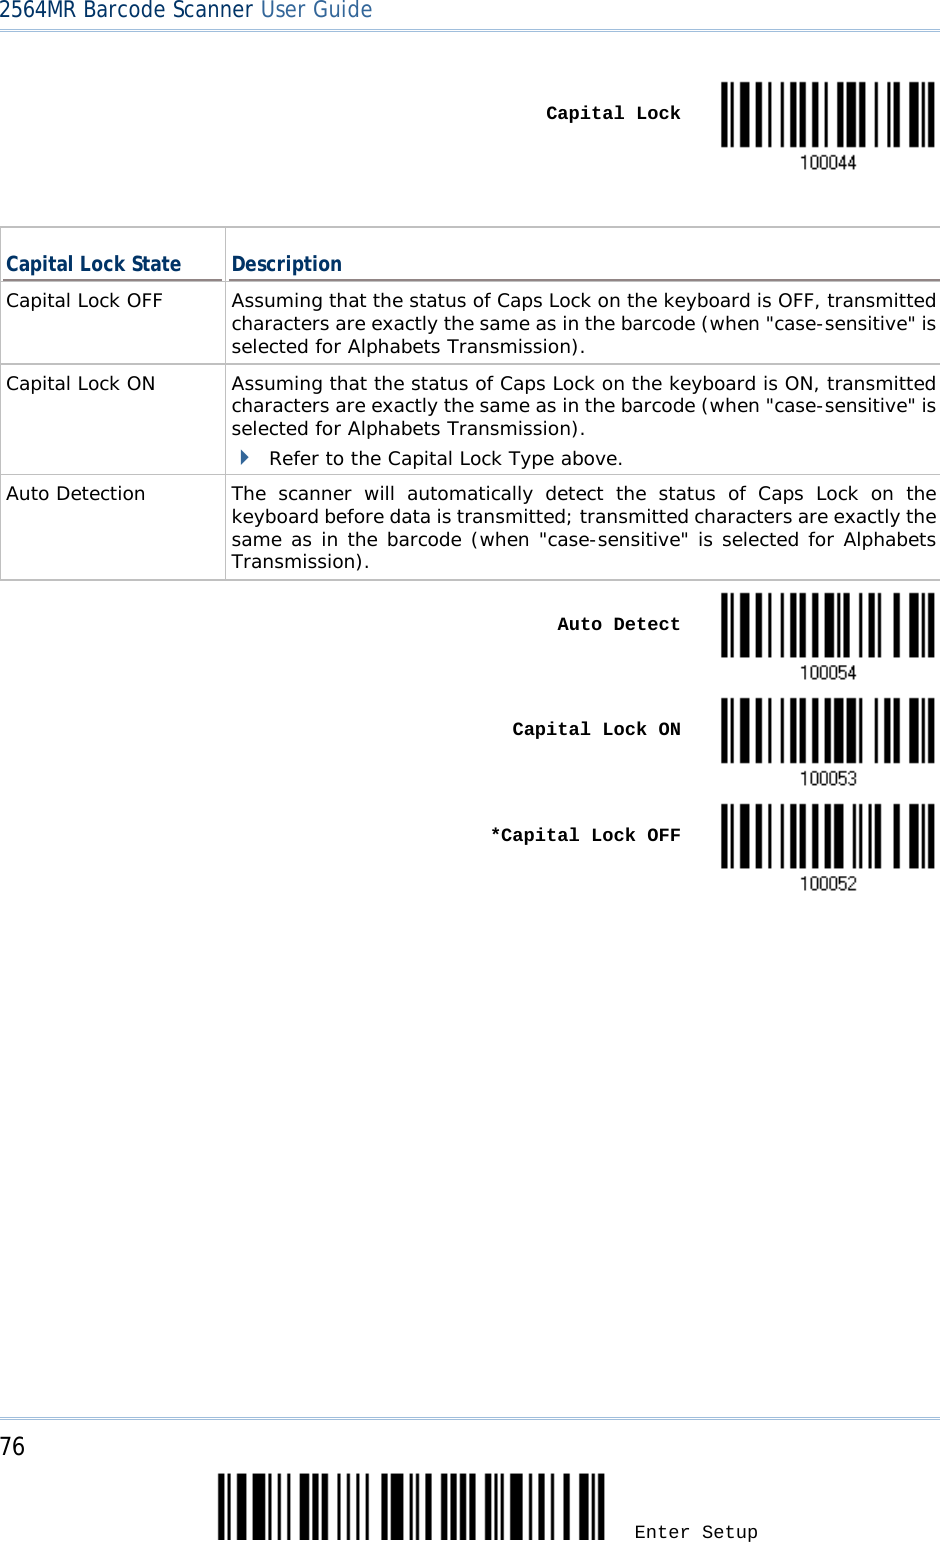 2564MR Barcode Scanner User Guide     Capital Lock   Capital Lock State Description Capital Lock OFF Assuming that the status of Caps Lock on the keyboard is OFF, transmitted characters are exactly the same as in the barcode (when &quot;case-sensitive&quot; is selected for Alphabets Transmission). Capital Lock ON Assuming that the status of Caps Lock on the keyboard is ON, transmitted characters are exactly the same as in the barcode (when &quot;case-sensitive&quot; is selected for Alphabets Transmission).  Refer to the Capital Lock Type above. Auto Detection The scanner will automatically detect the status of Caps Lock on the keyboard before data is transmitted; transmitted characters are exactly the same as in the barcode (when &quot;case-sensitive&quot; is selected for Alphabets Transmission).     Auto Detect     Capital Lock ON     *Capital Lock OFF    76 Enter Setup 